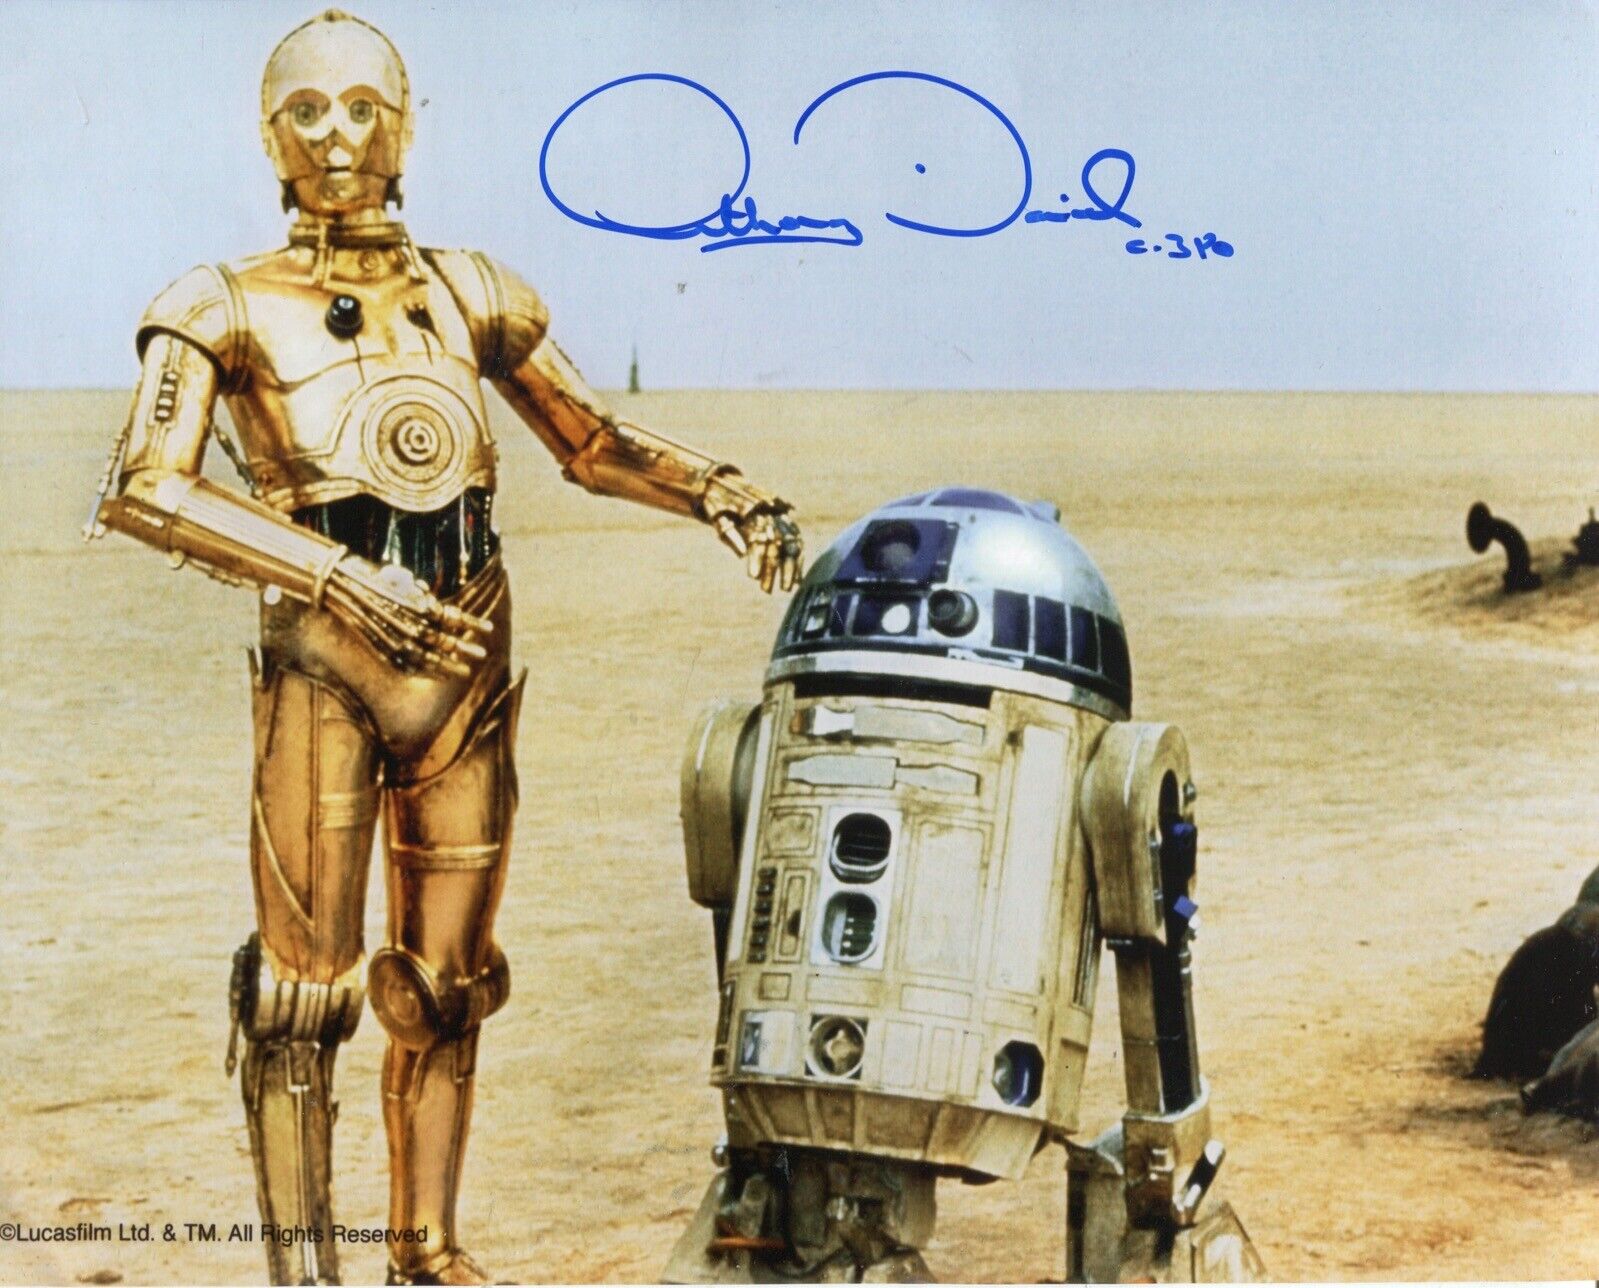 STAR WARS 8x10 movie Photo Poster painting signed by C-3PO actor Anthony Daniels - UACC DEALER